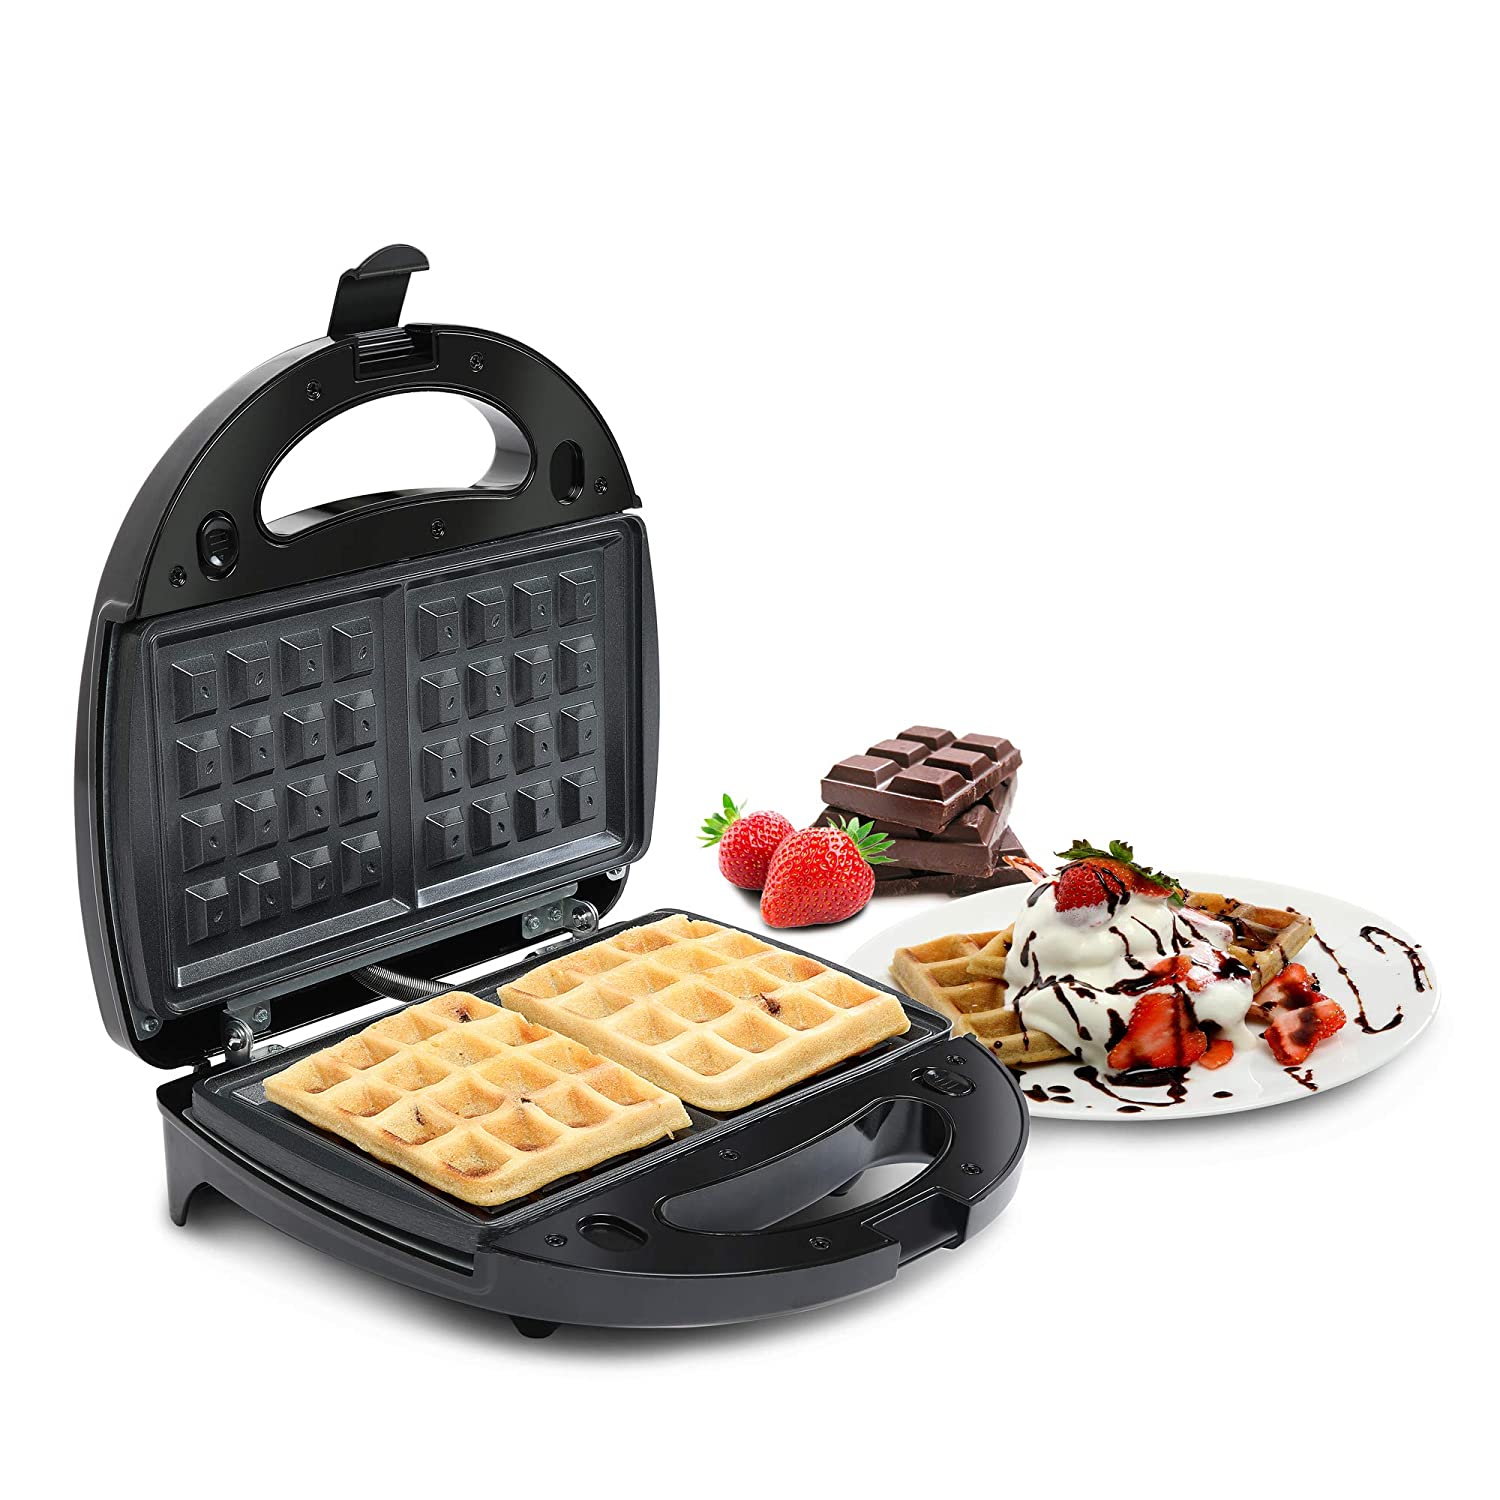 Russell Hobbs RST750M3 750 Watt Non-Stick 3 in 1 Sandwich Maker (Sandwich Toast/Waffle/Grill) Toaster with Detachable Multi-Plate and 2 Year Manufacturer Warranty - Mahajan Electronics Online